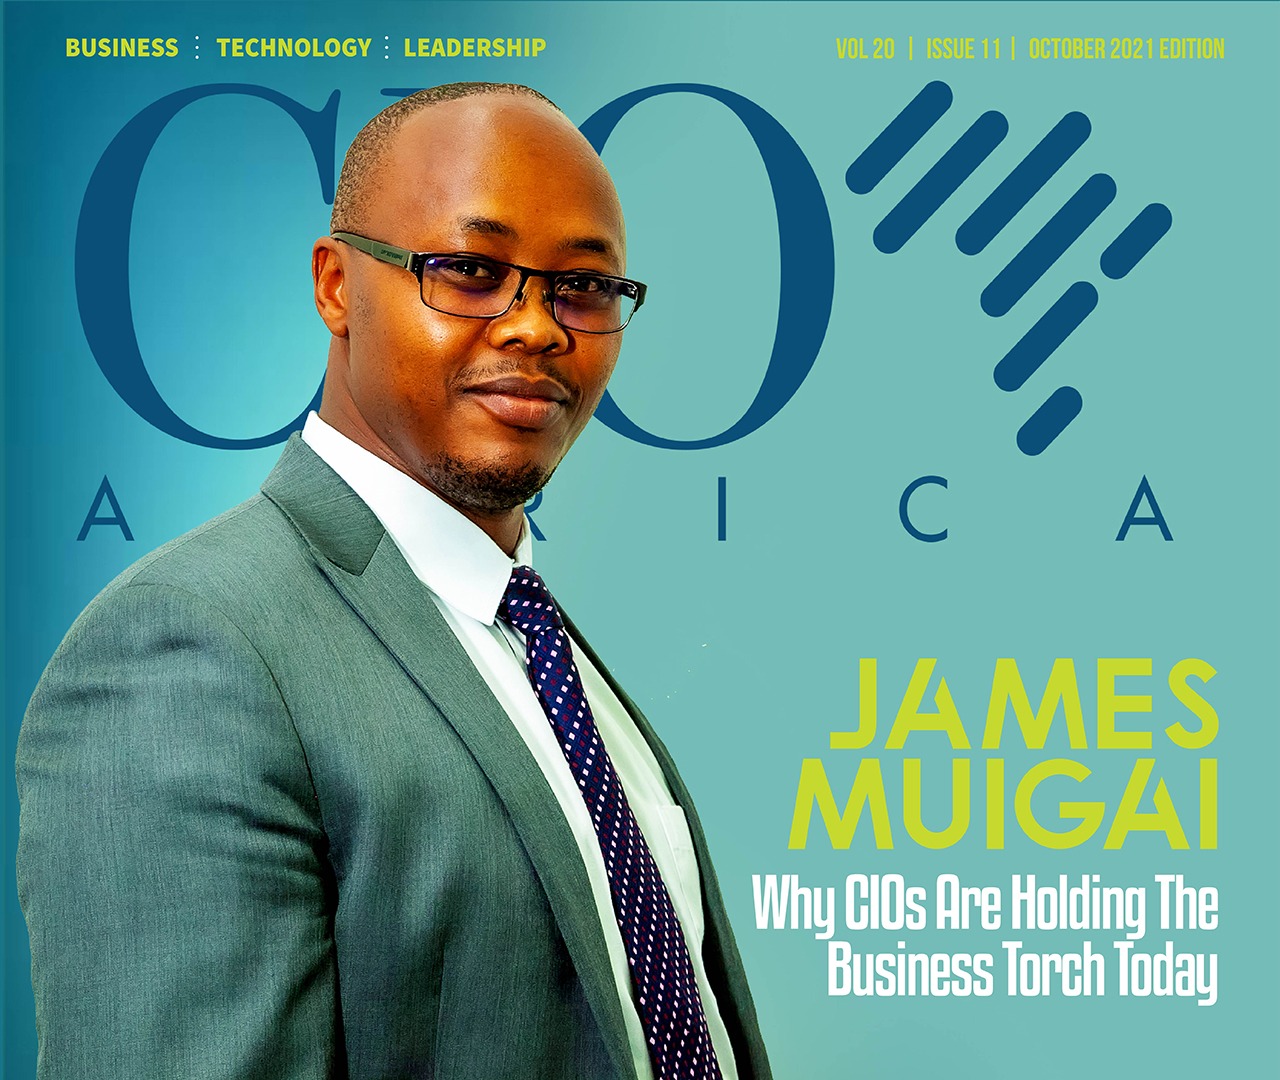 CIO Africa October 2021 Edition Now Out!